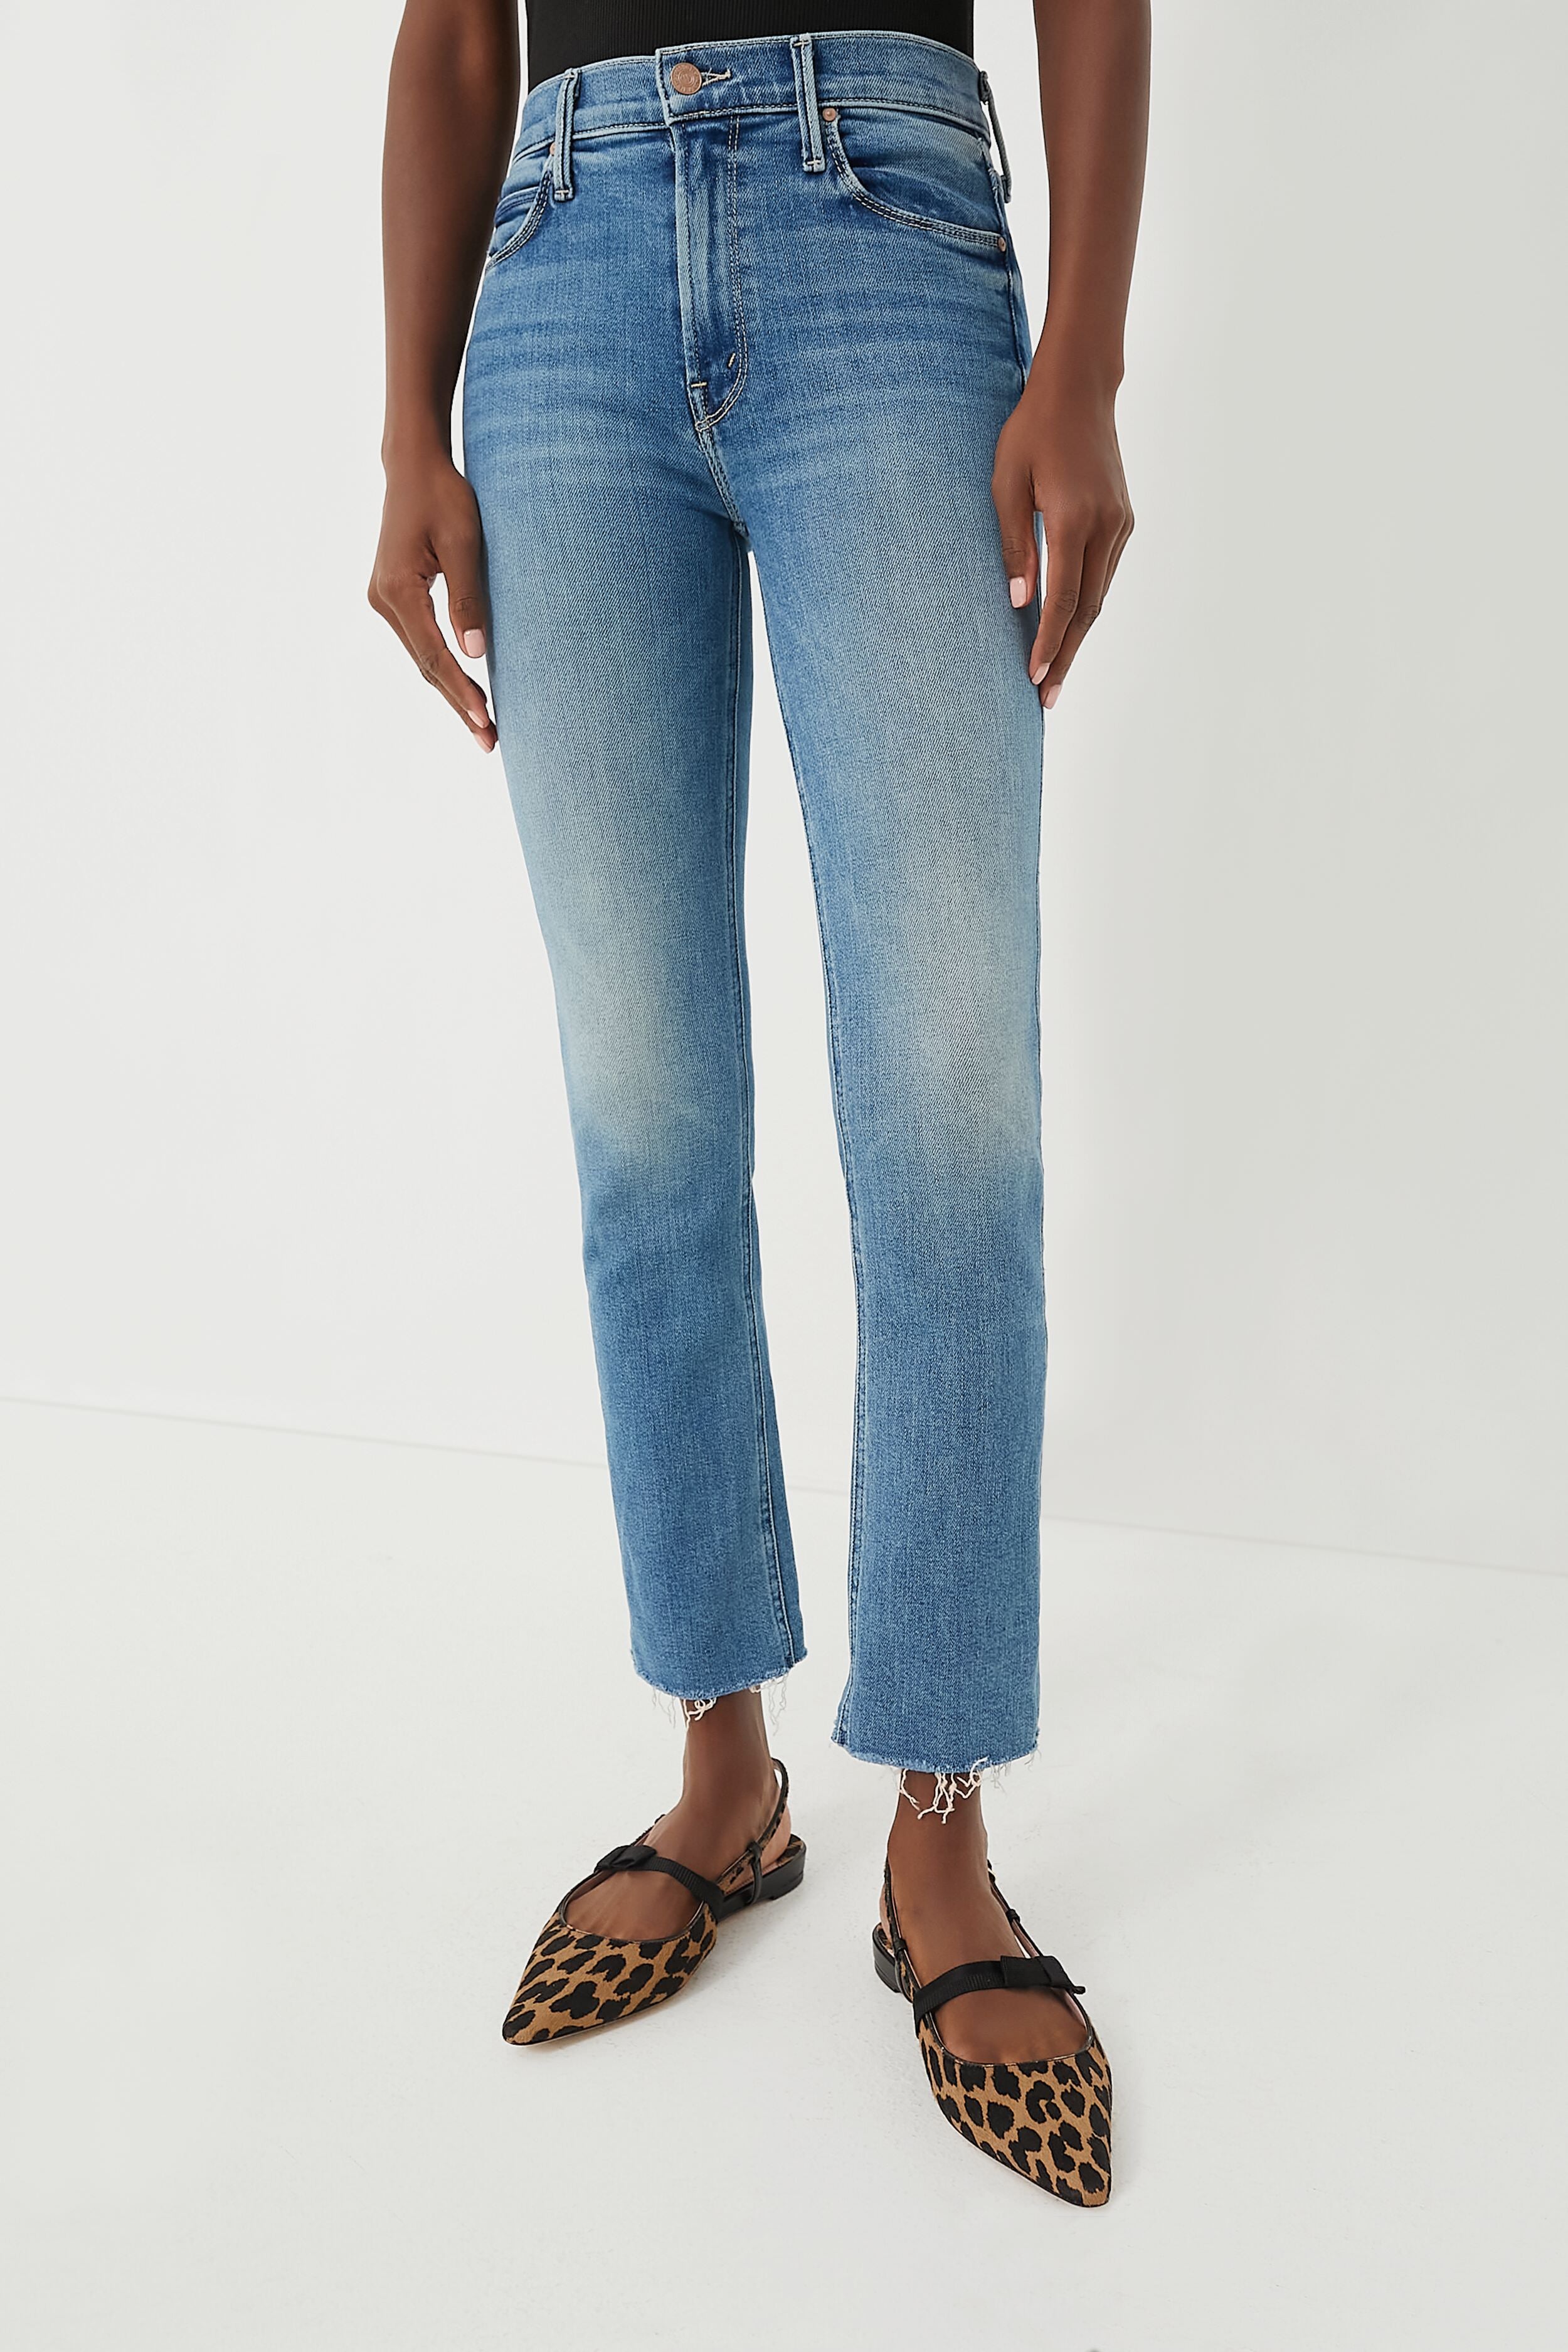 Mother Denim The Rider Ankle Jean